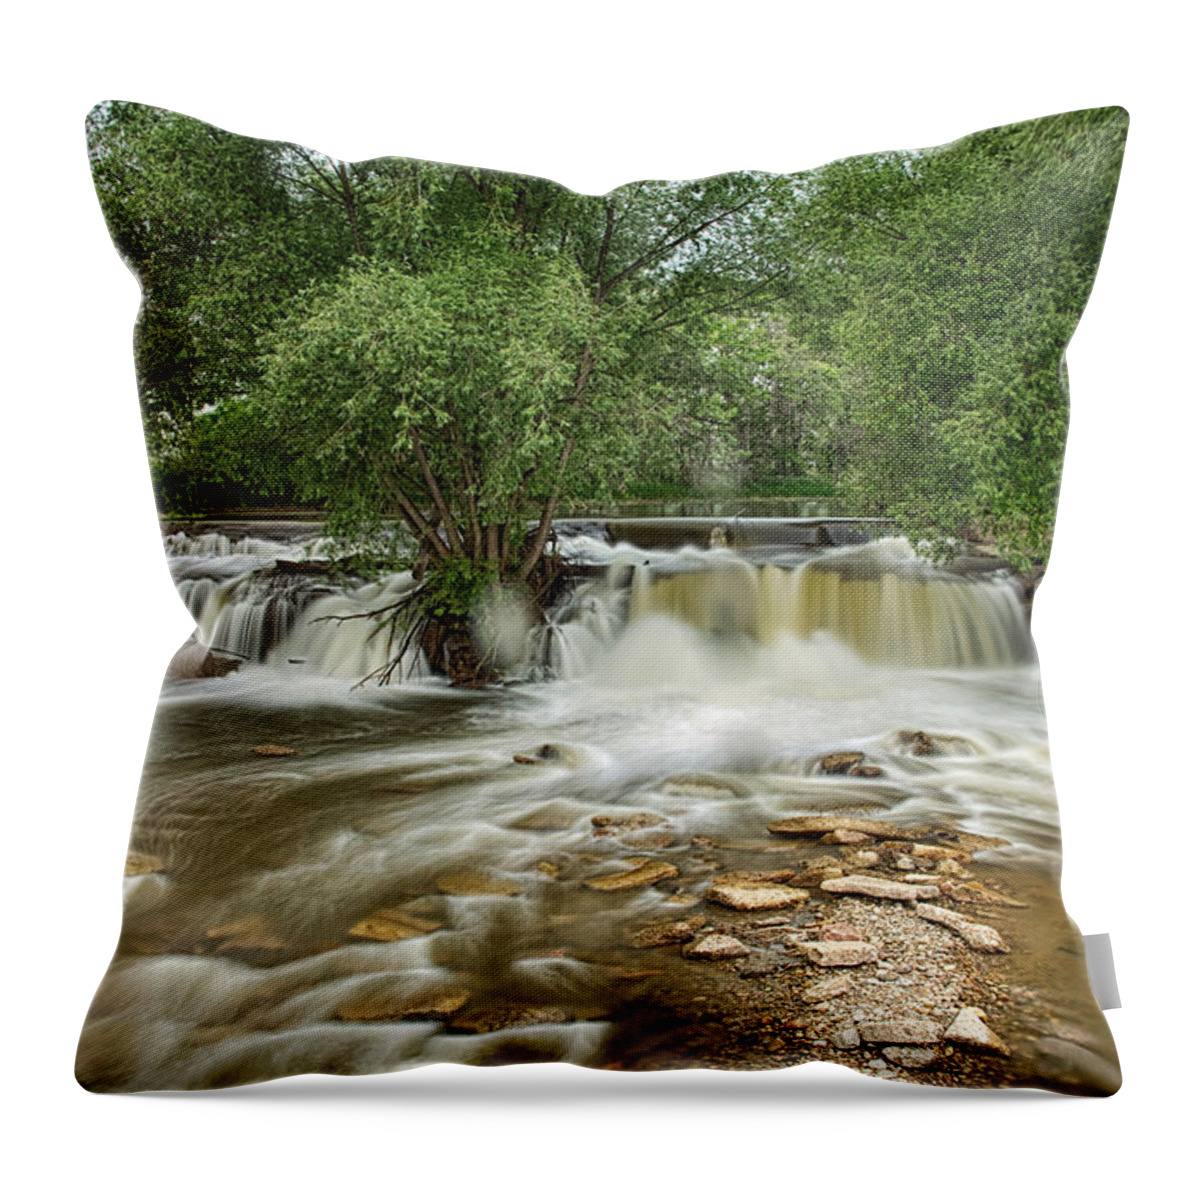 Waterfall Throw Pillow featuring the photograph St Vrain Waterfall by James BO Insogna